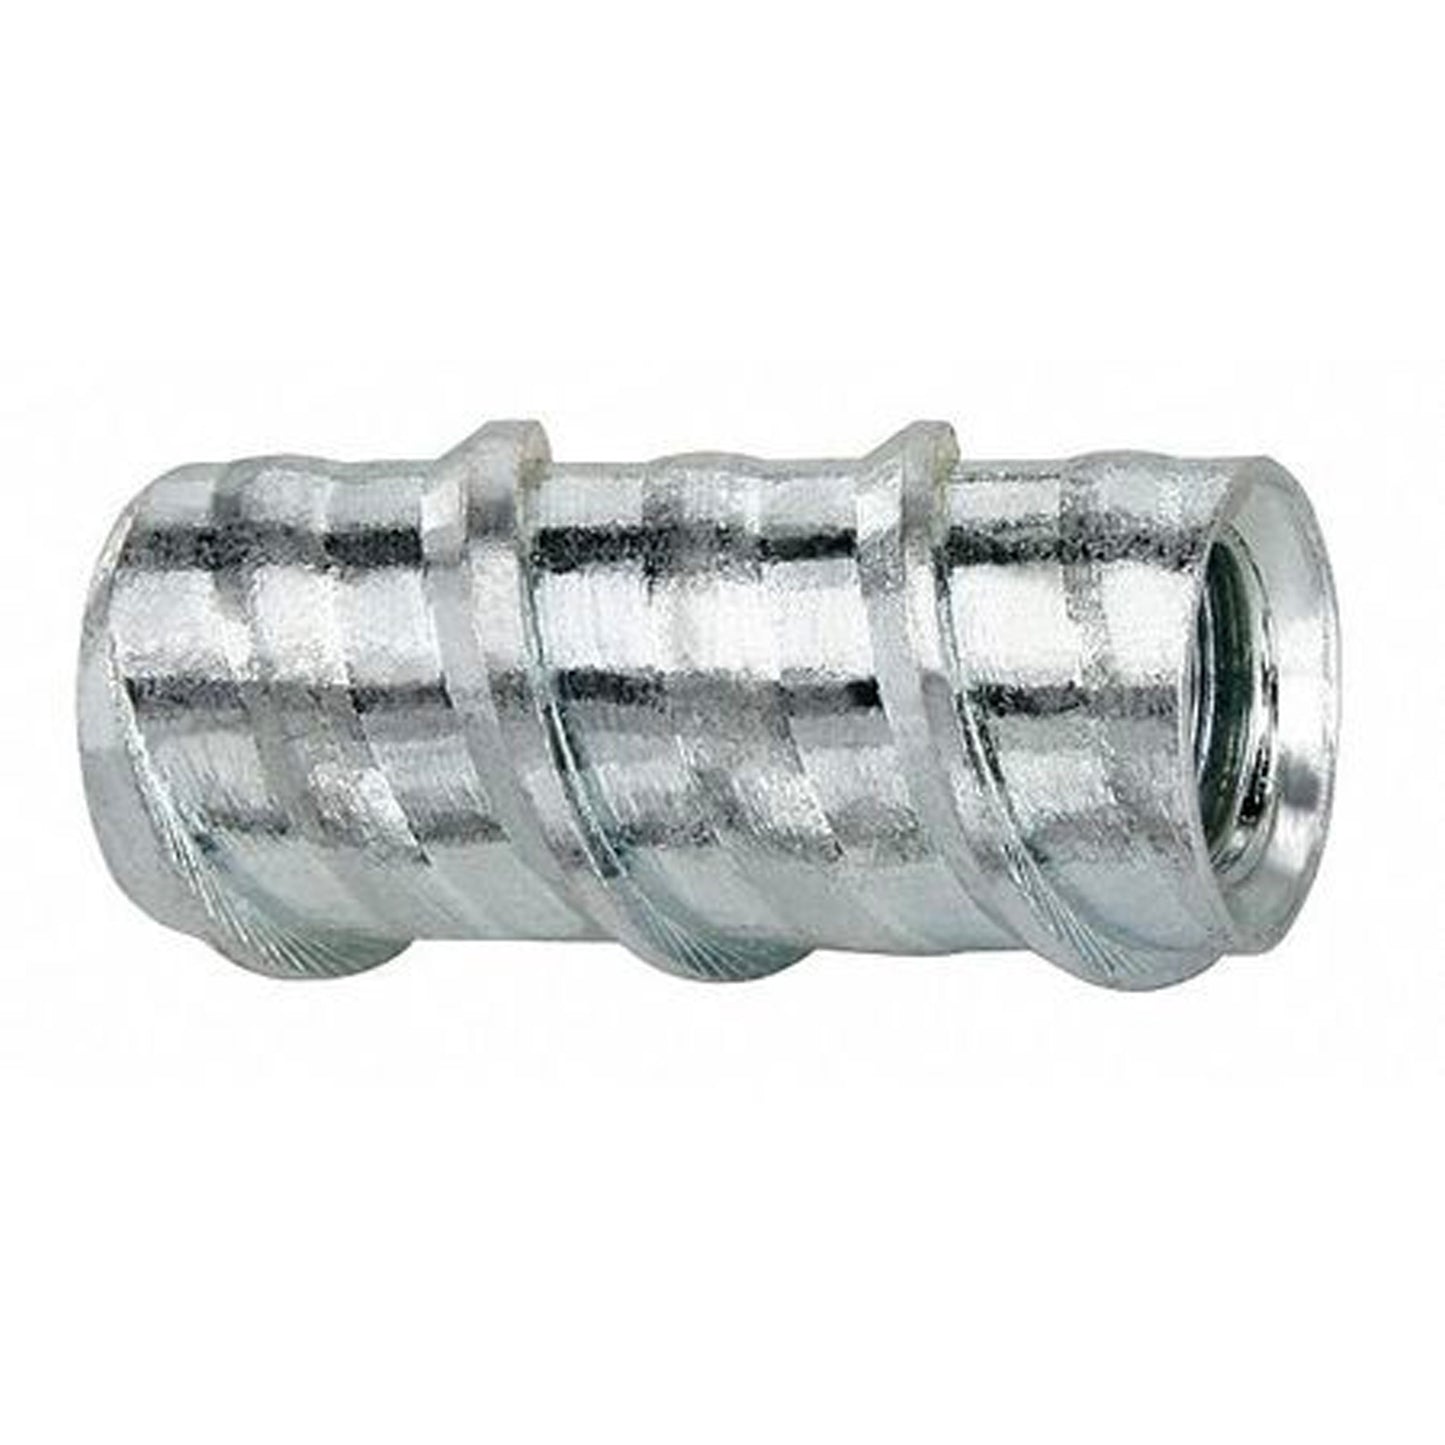 6403SD-PWR Snake+: 1/2-13 Internal Thread Size, 29/32 in Lg, Carbon Steel